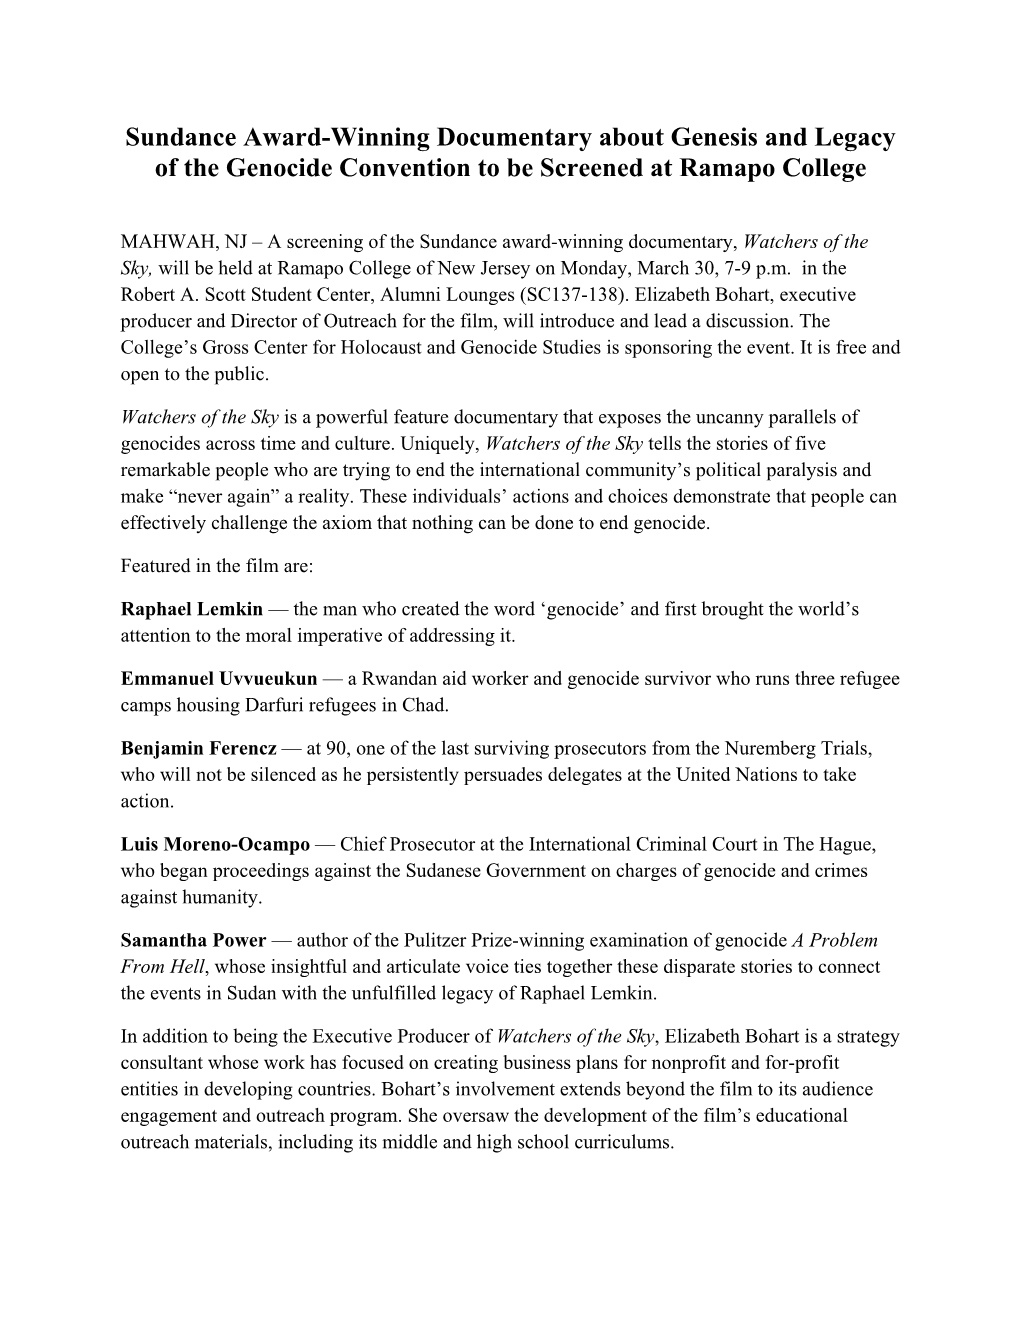 Sundance Award-Winning Documentary About Genesis and Legacy of the Genocide Convention to Be Screened at Ramapo College